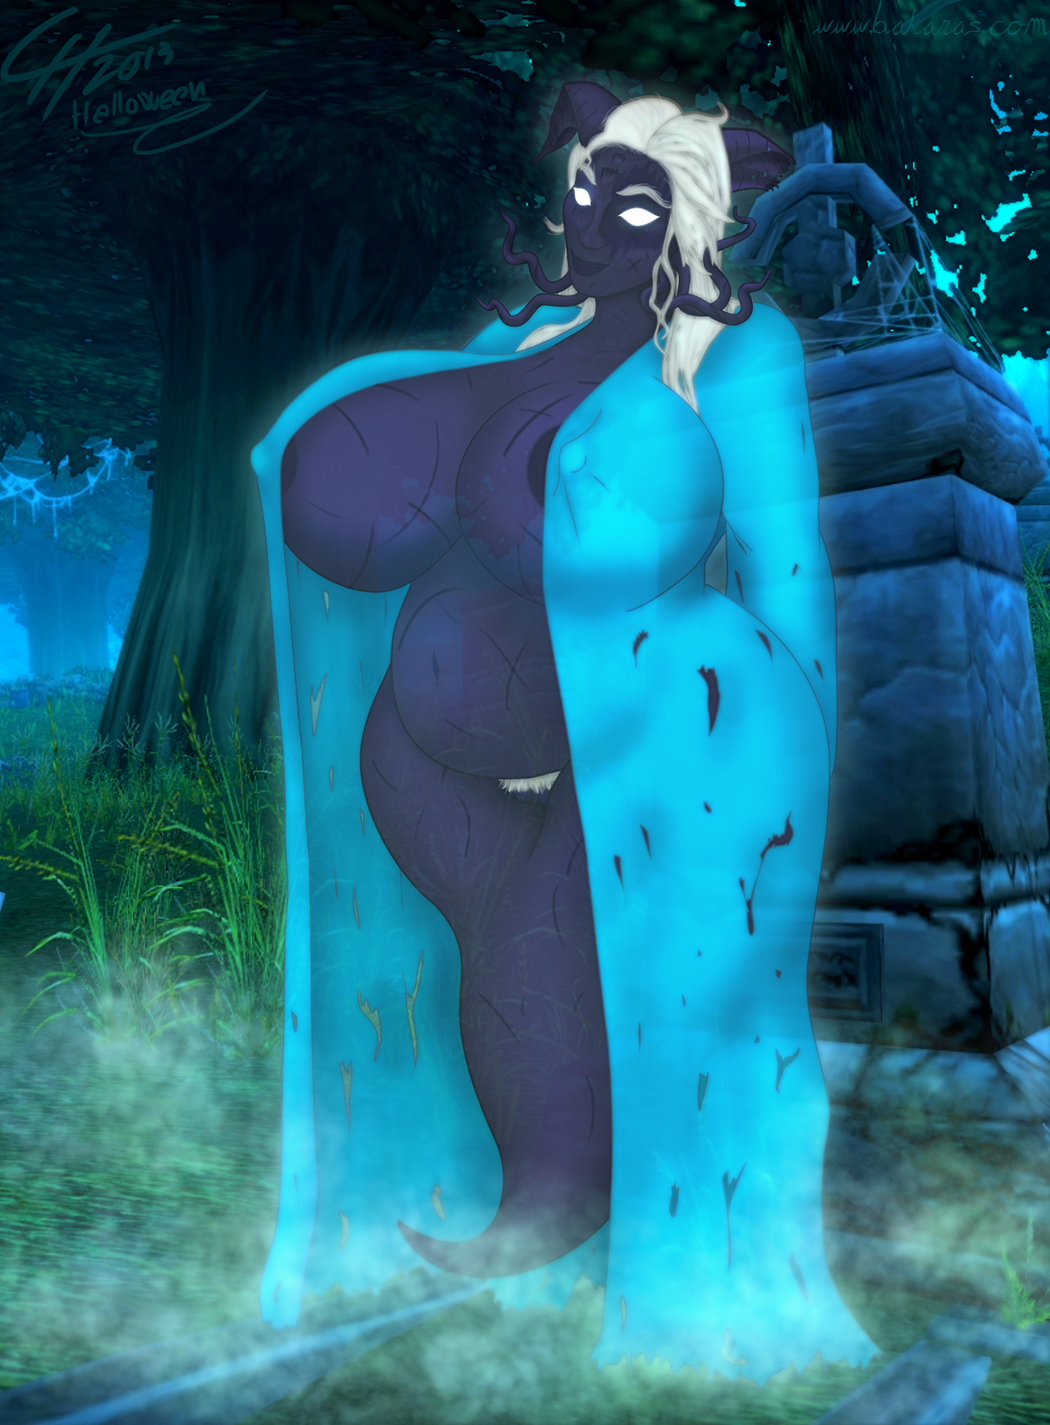 Wind from the Past [Draenei/BBW/Pinup]
Hallow's End is here and soon Day of the Dead!
With these special days, lost love ones and spirits roam
the lands of the living, celebrating and having fun time.
Also here's Selanaar as a ghost!
Keywords: Draenei;OC;BBW;Pinup